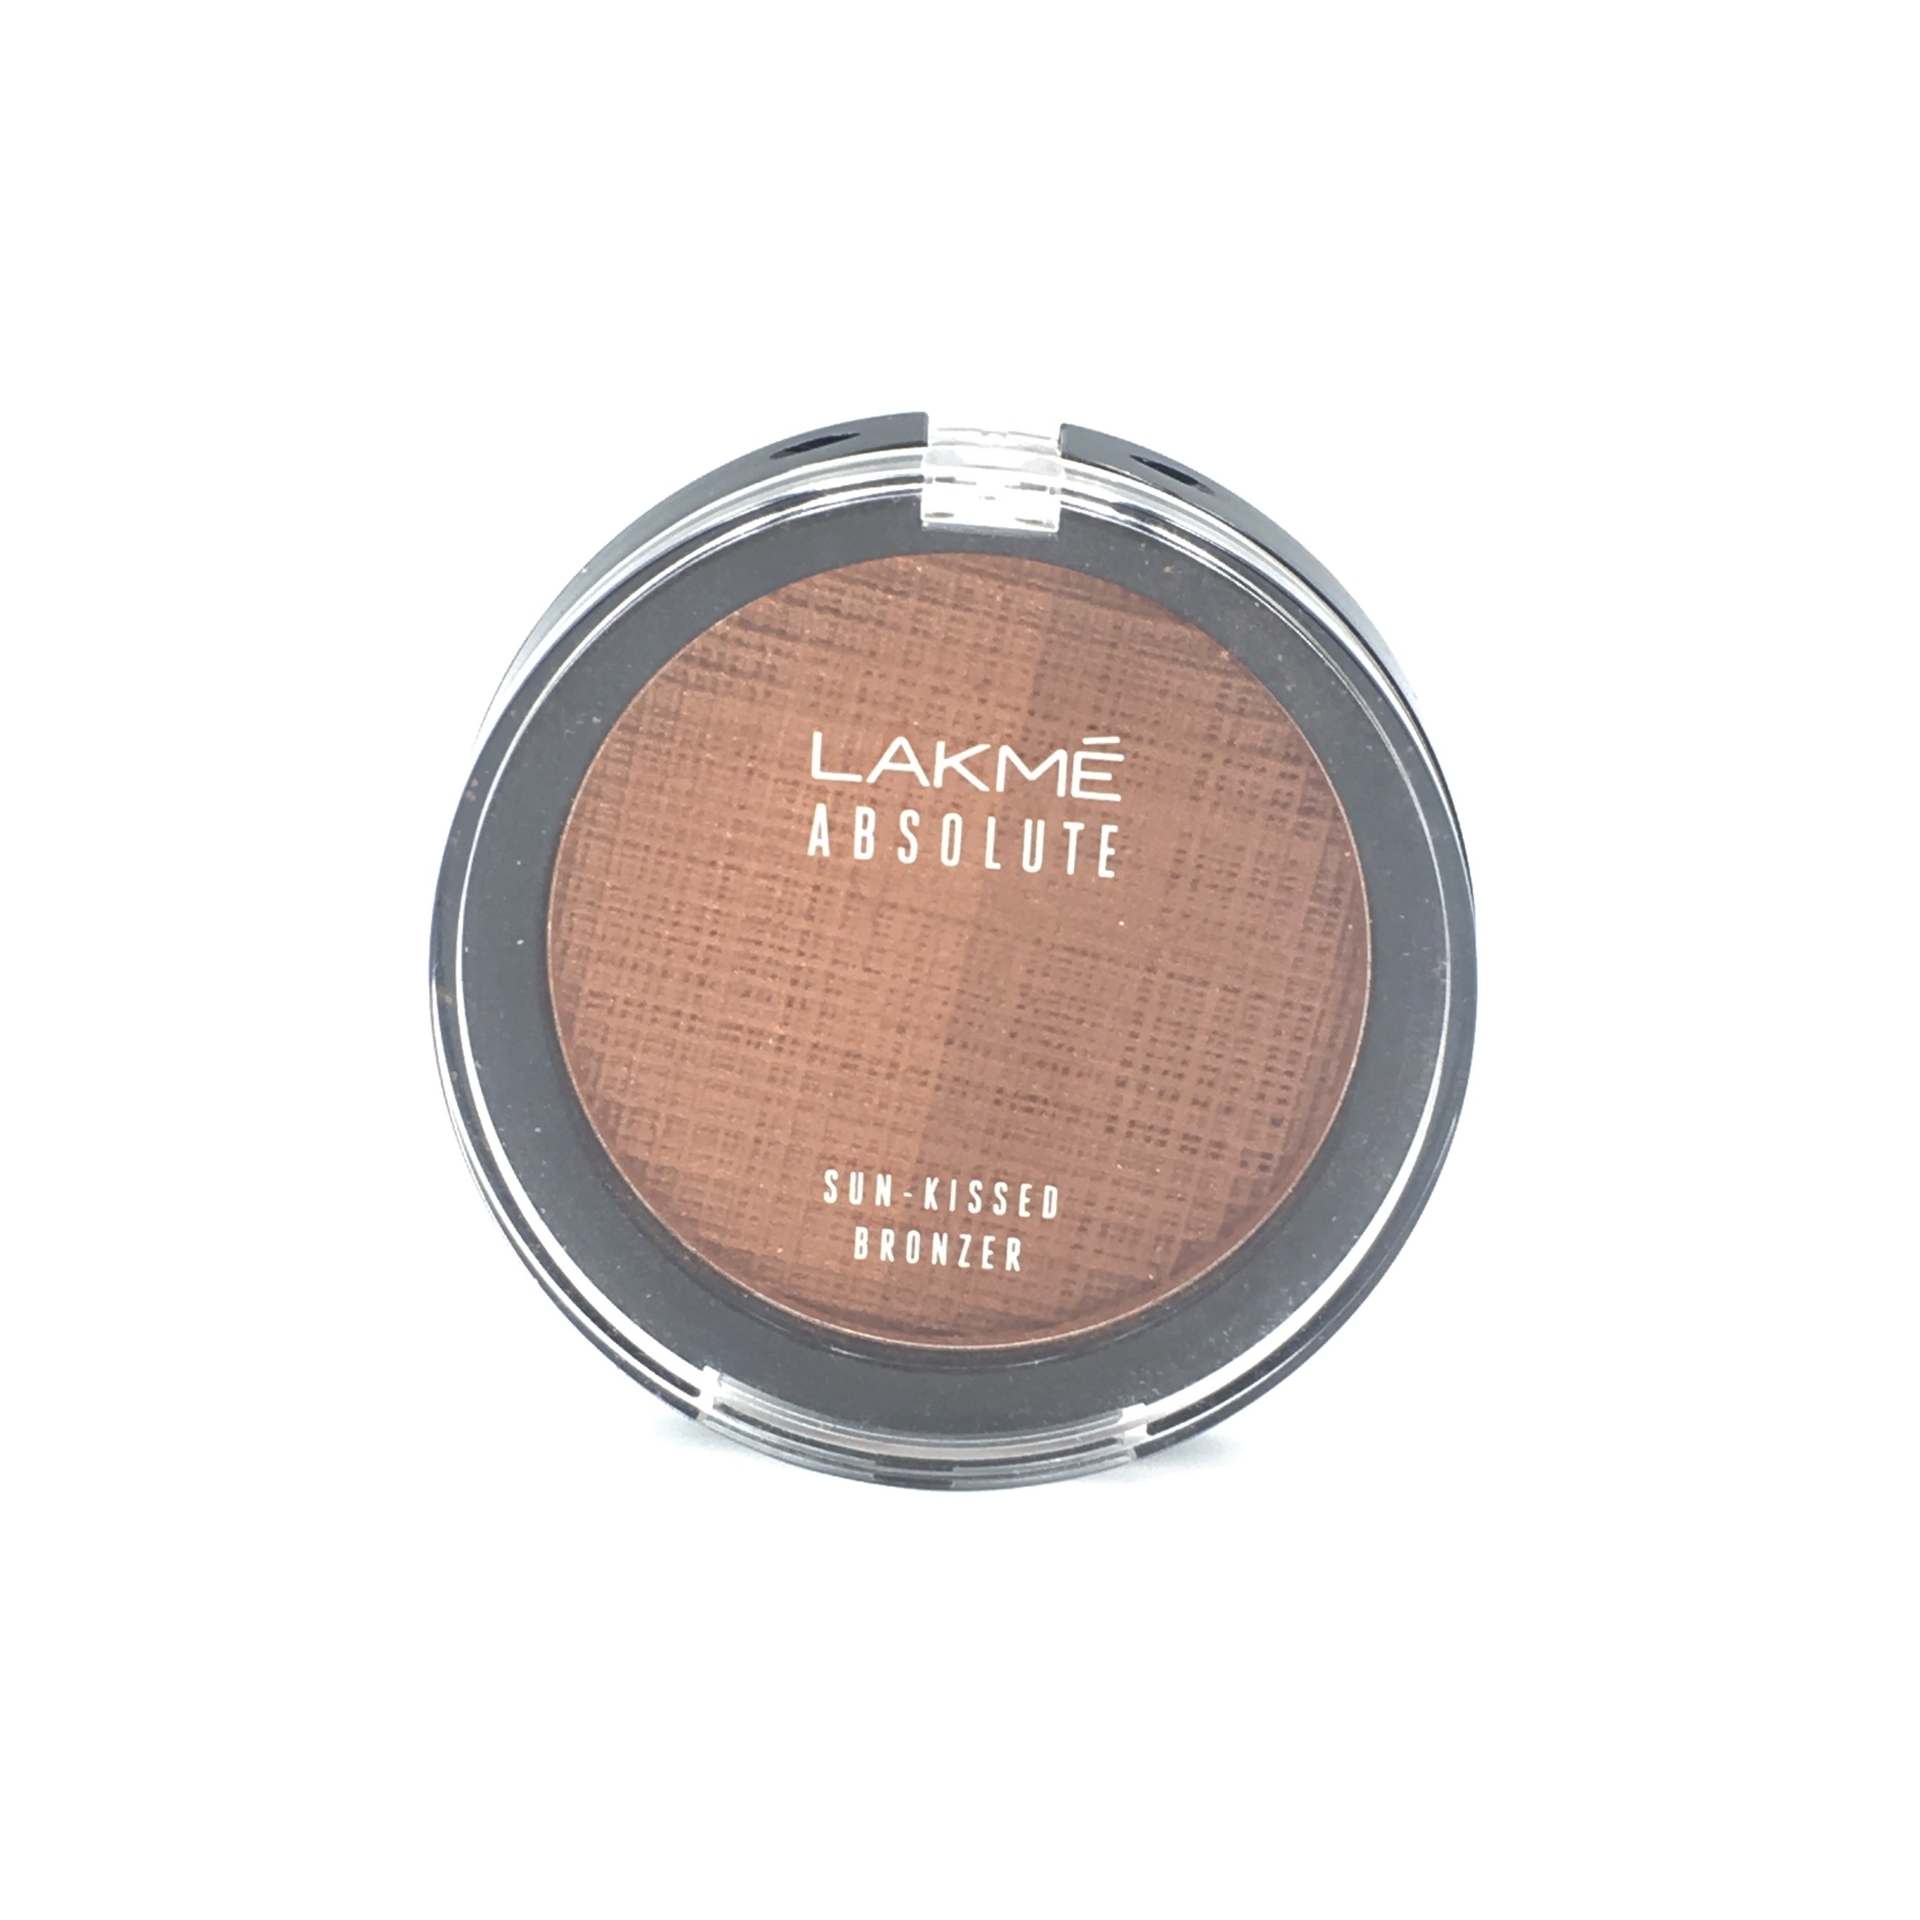 Lakme Absolute Sun Kissed Bronzer Faces